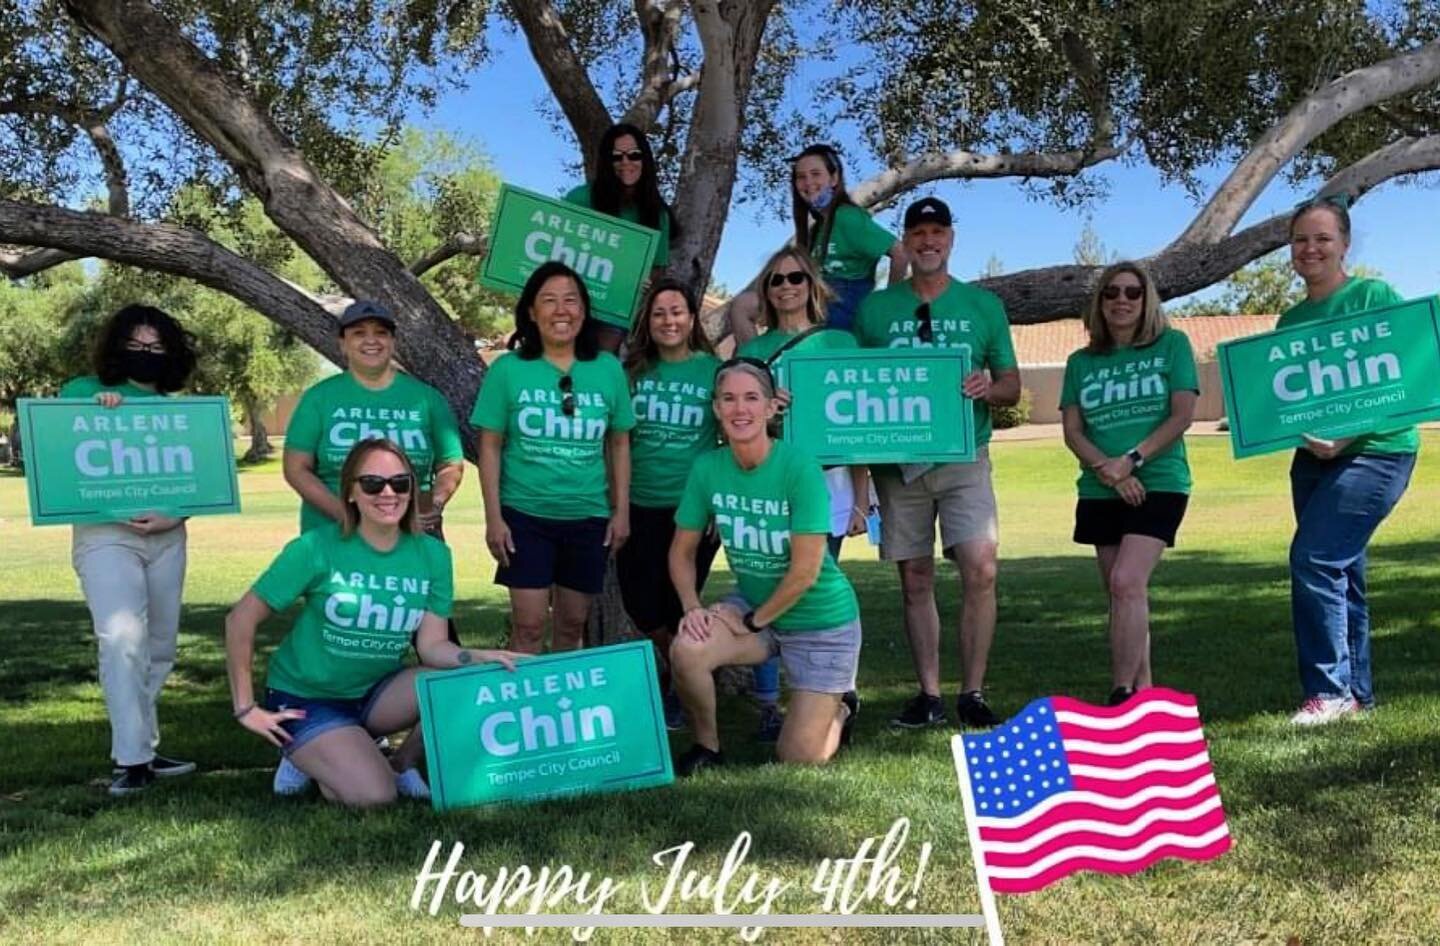 From me and my campaign team, Happy 4th of July! 🇺🇸🇺🇸🇺🇸

#WinWithChin✅✅✅

arlenefortempe.com

#tempe #tempearizona #tempeaz #southtempe #downtowntempe #july4th